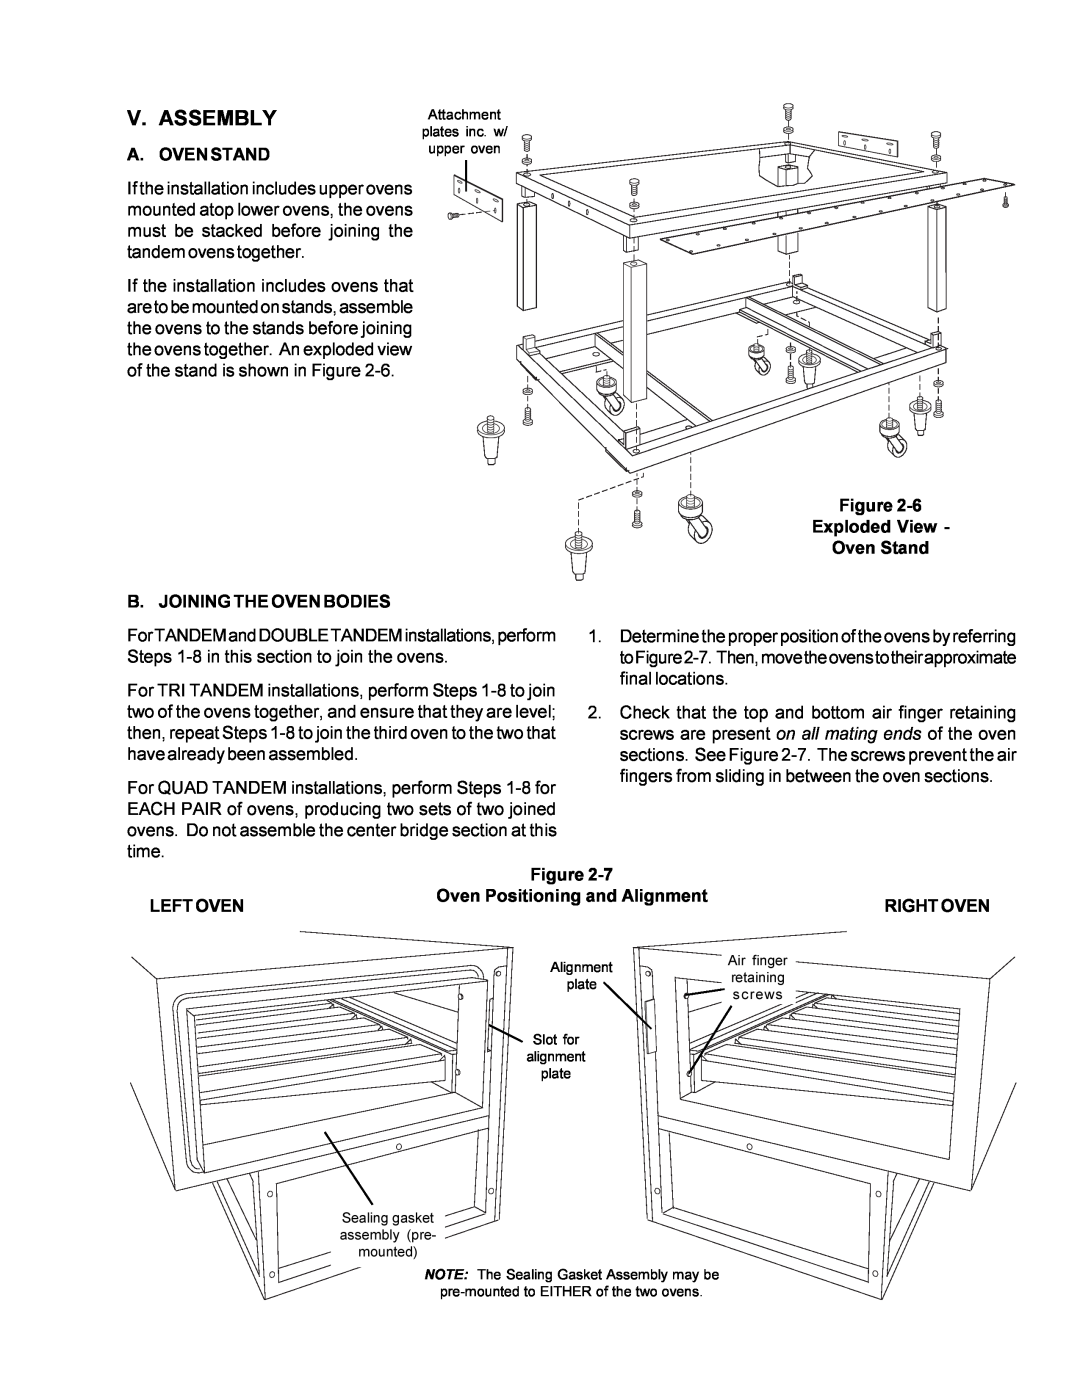 Middleby Marshall PS360 V. Assembly, A. Oven Stand, Exploded View Oven Stand B. JOINING THE OVEN BODIES, Left Oven 